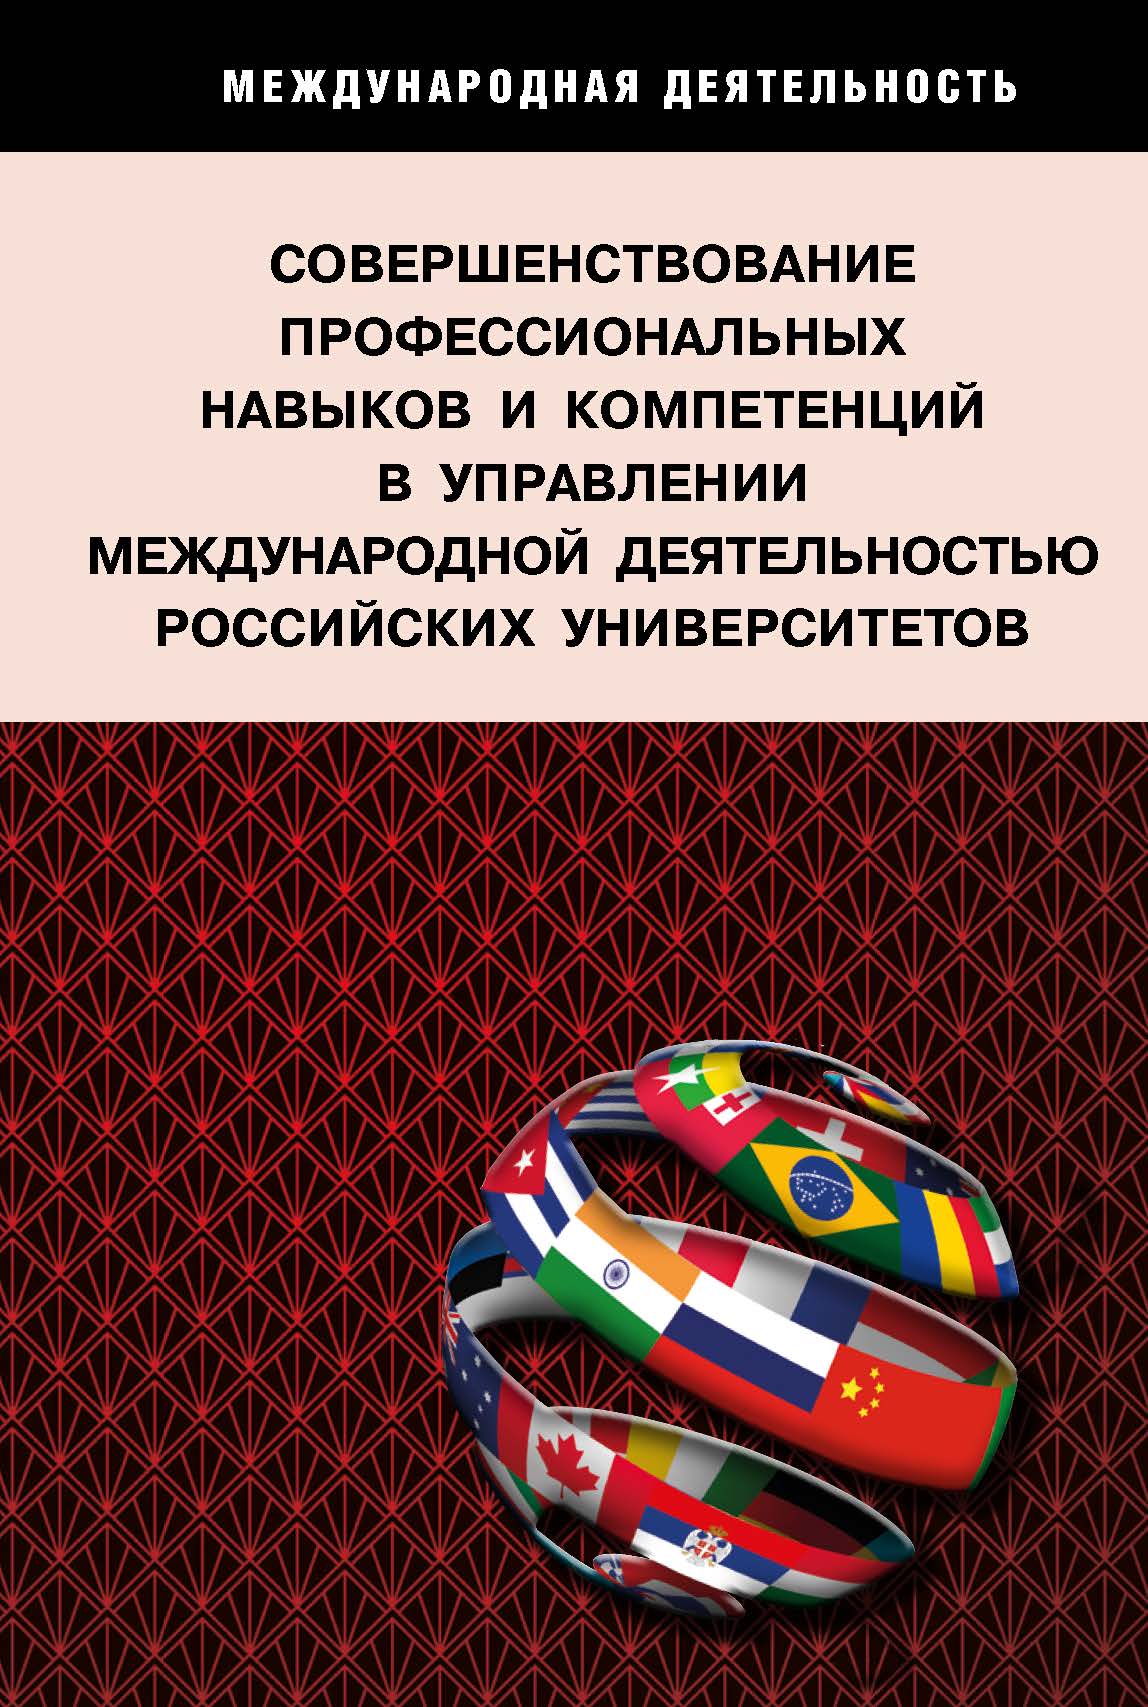                         IMPROVING PROFESSIONAL SKILLS AND COMPETENCIES IN THE MANAGEMENT OF INTERNATIONAL ACTIVITIES OF RUSSIAN UNIVERSITIES: NATIONAL INTERESTS AND REGIONAL DEVELOPMENT
            